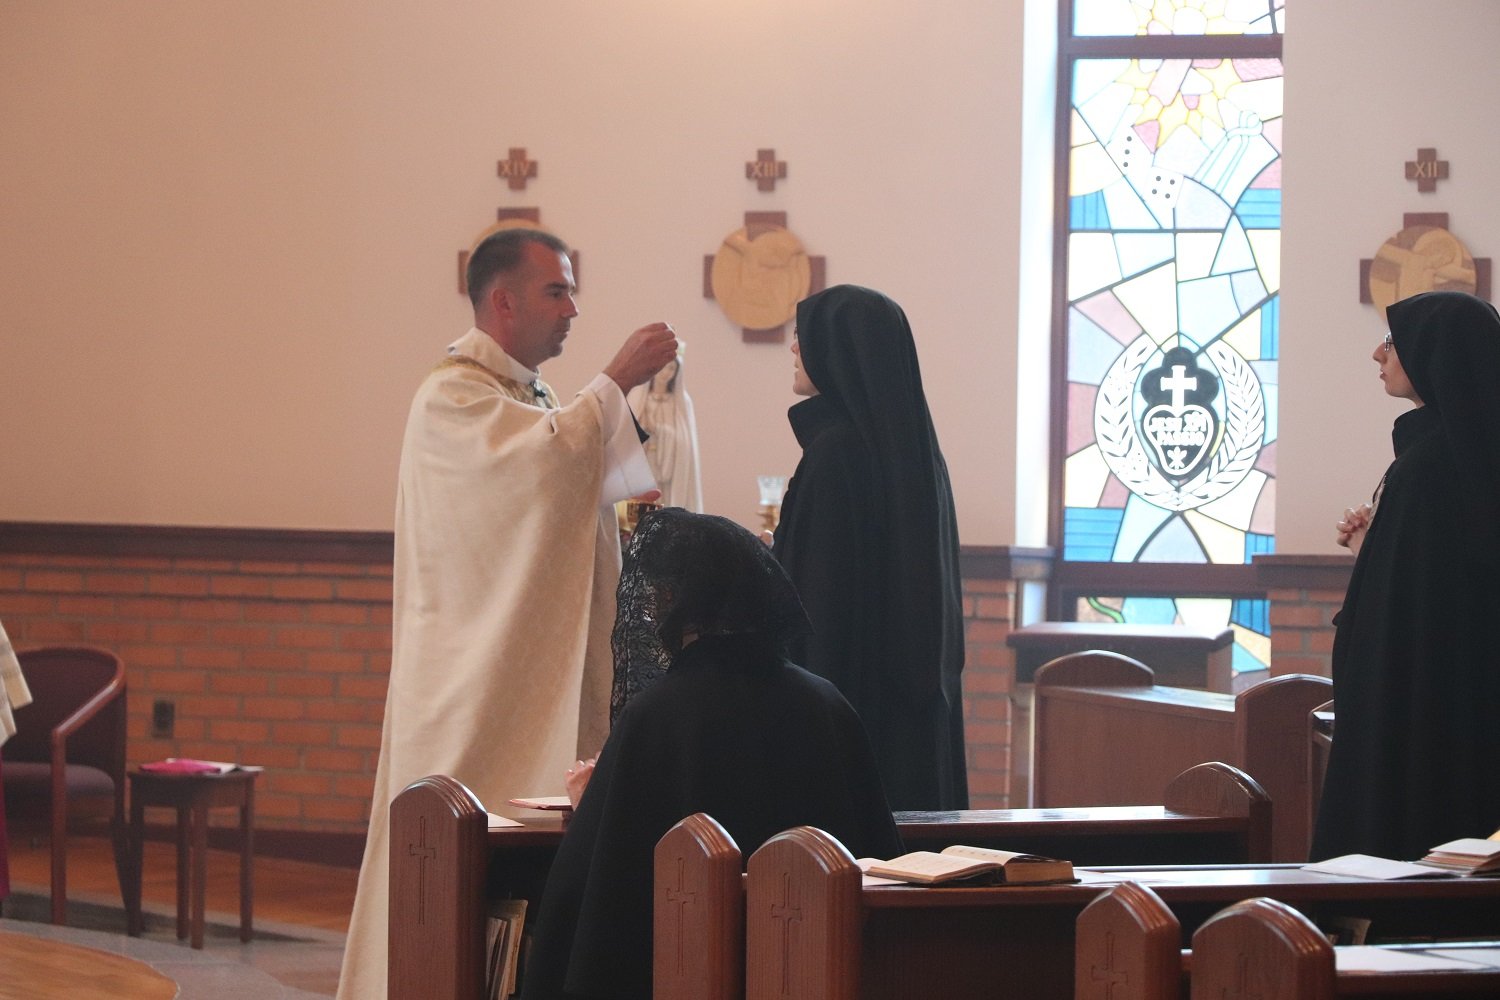  Mother receives her Sacramental Spouse from the hands of her priest-brother 